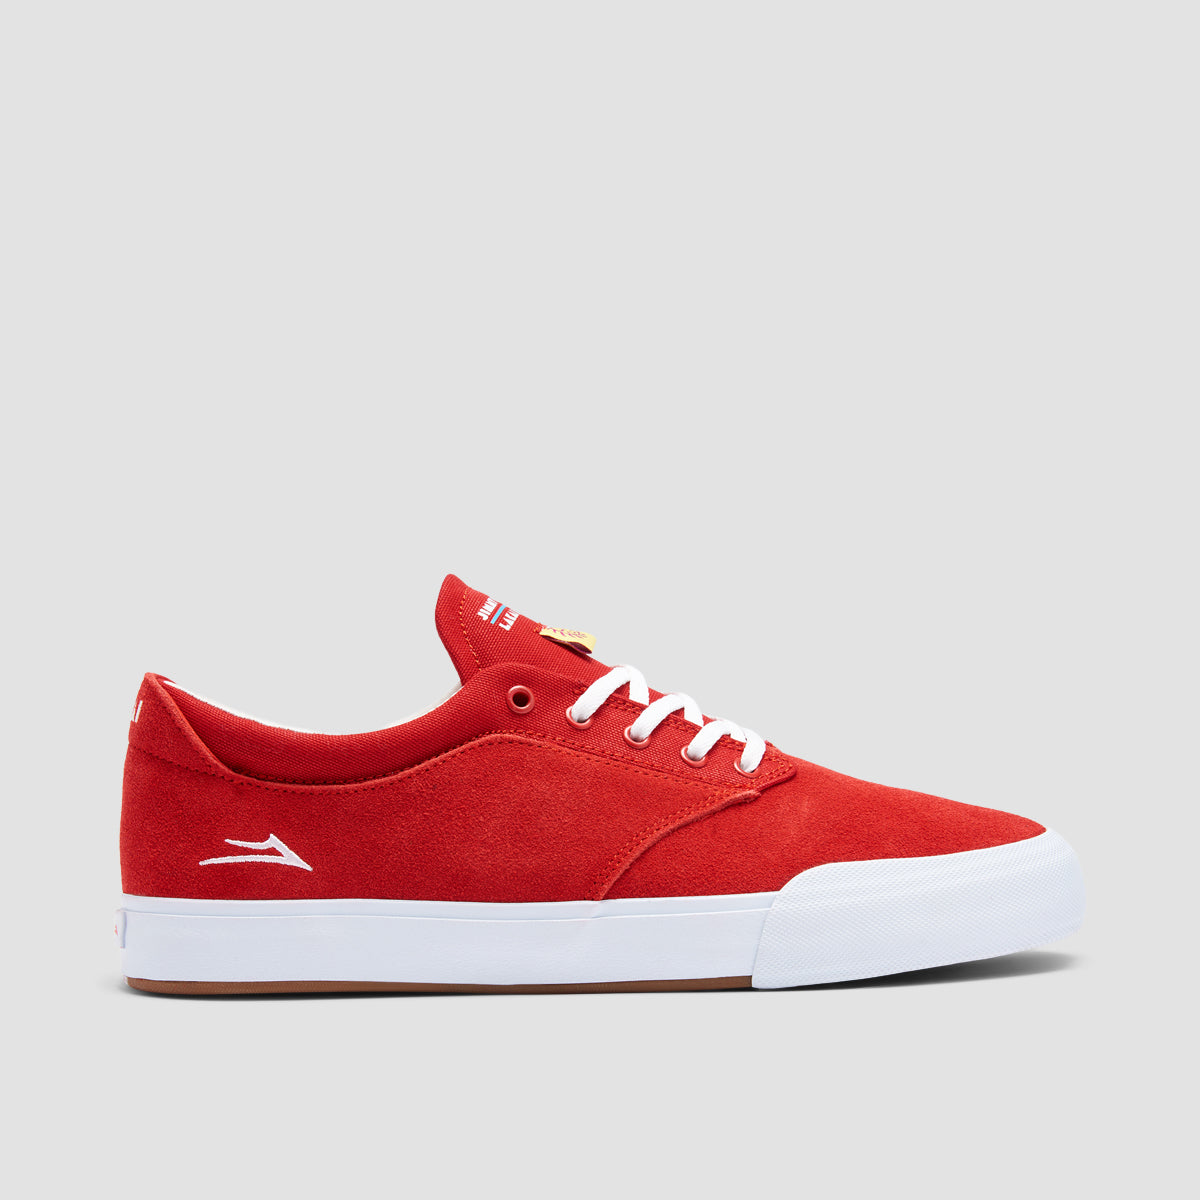 Lakai Wilkins Shoes - Red Suede